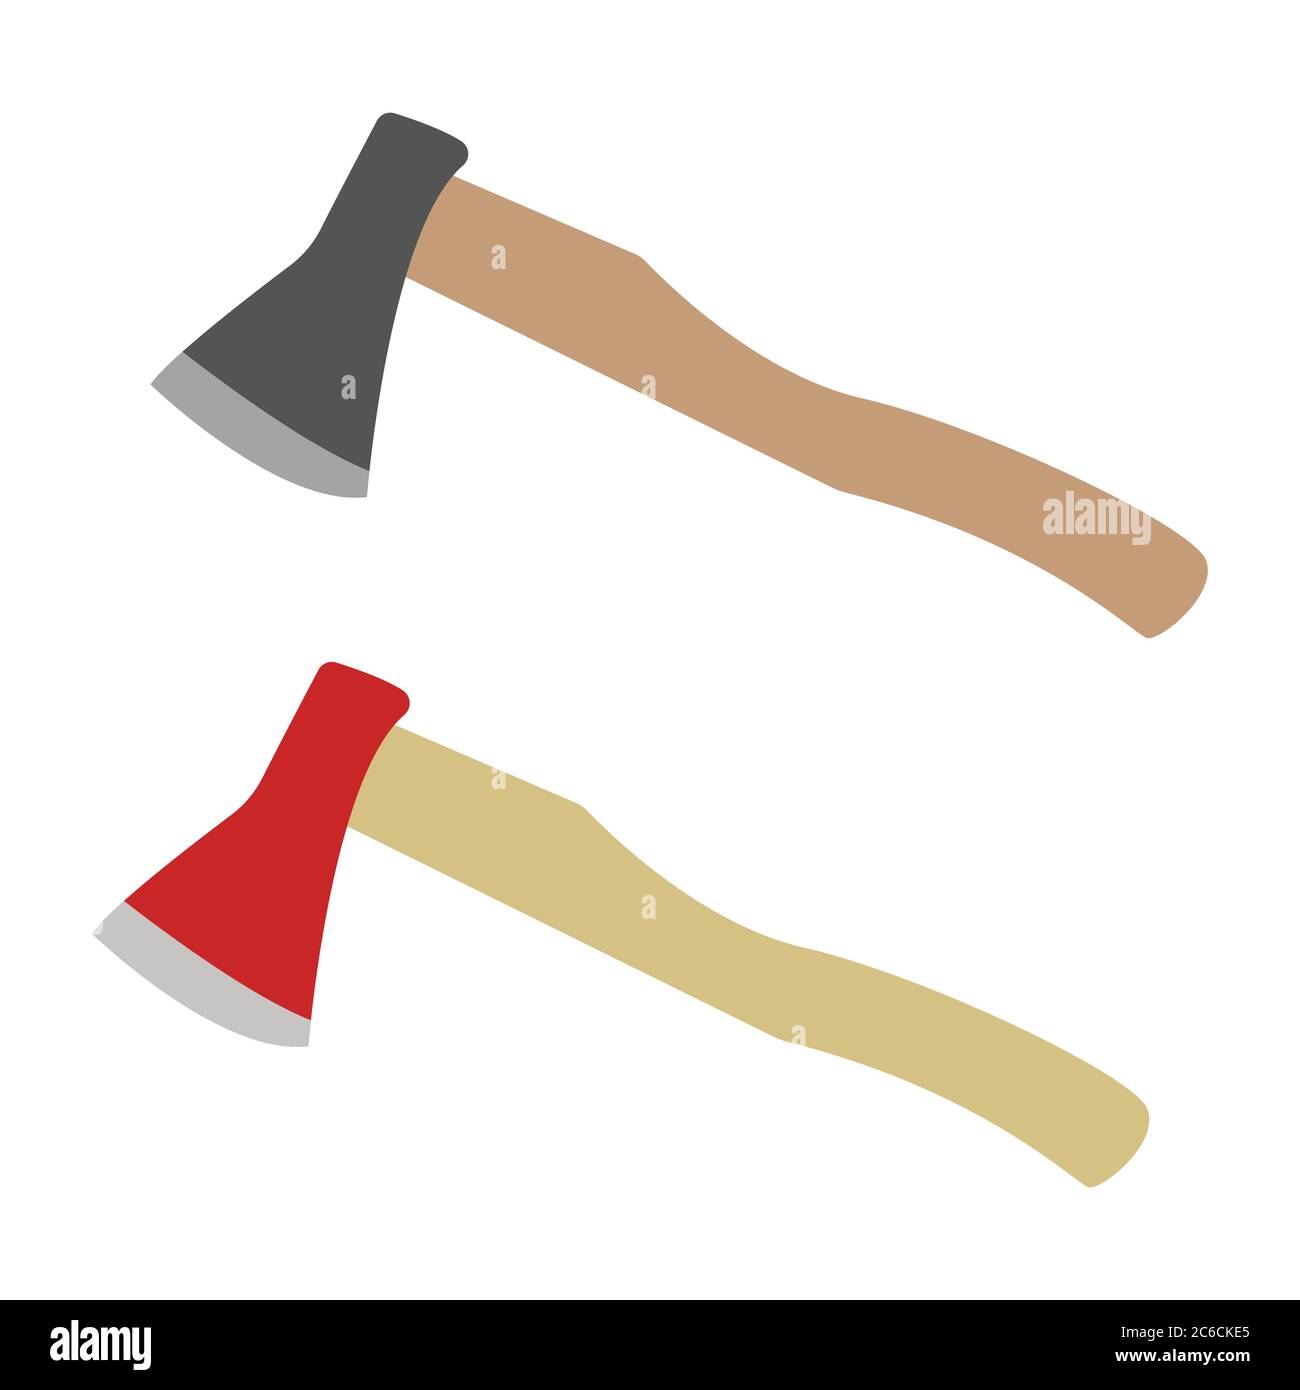 Wooden axe and red fire axe in flat style Stock Vector